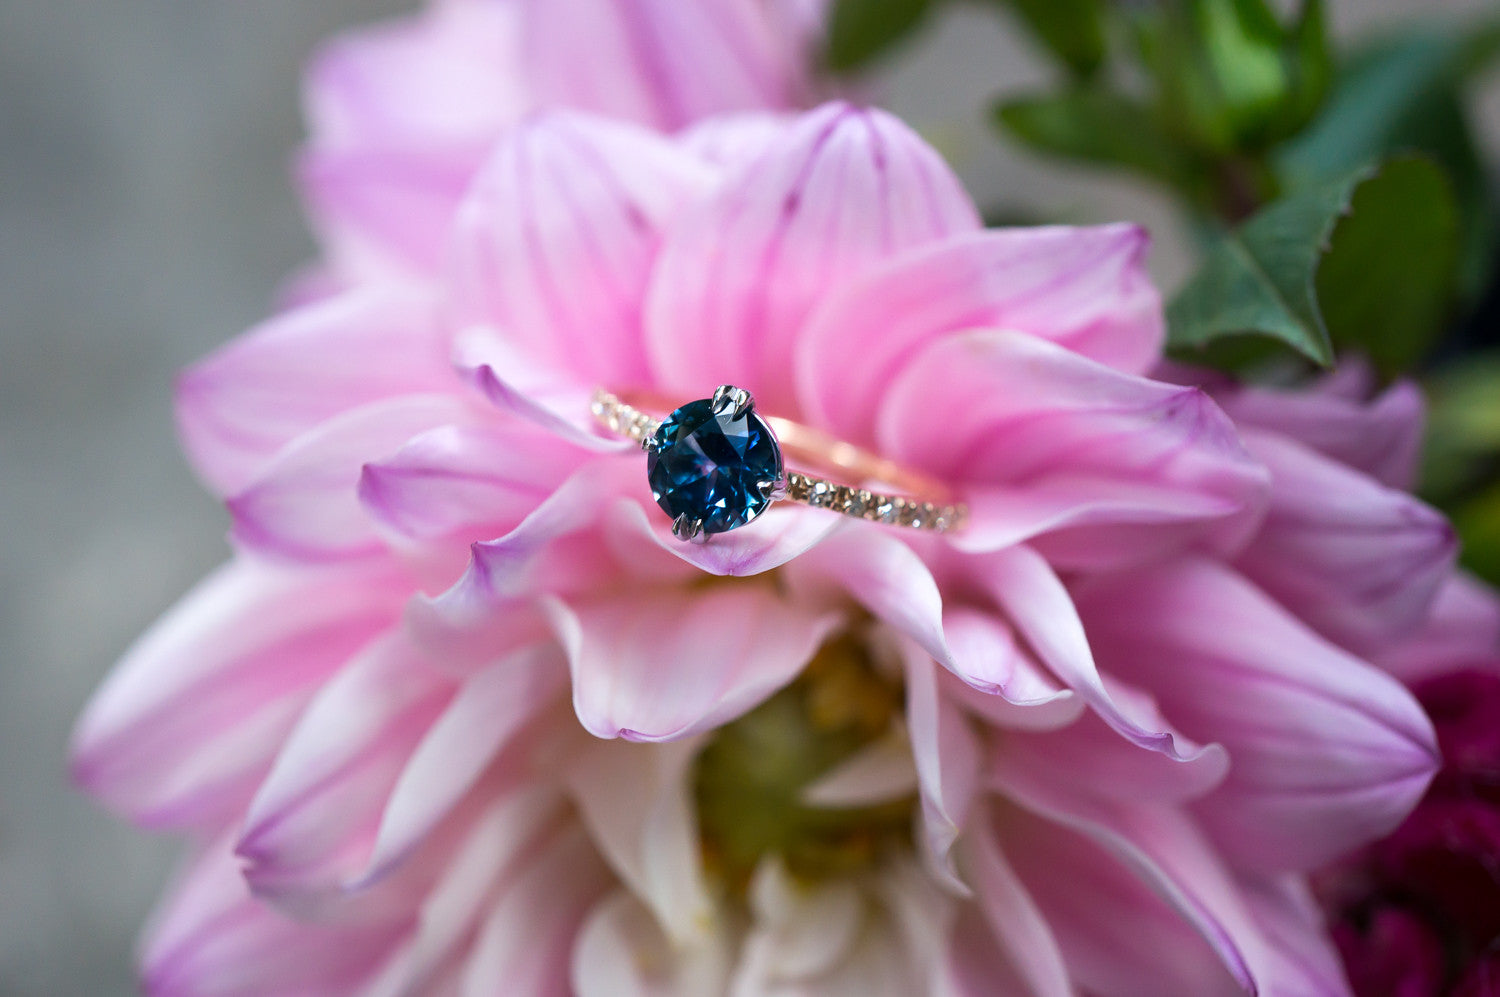 Sapphire Collet Engagement Ring - S. Kind & Co